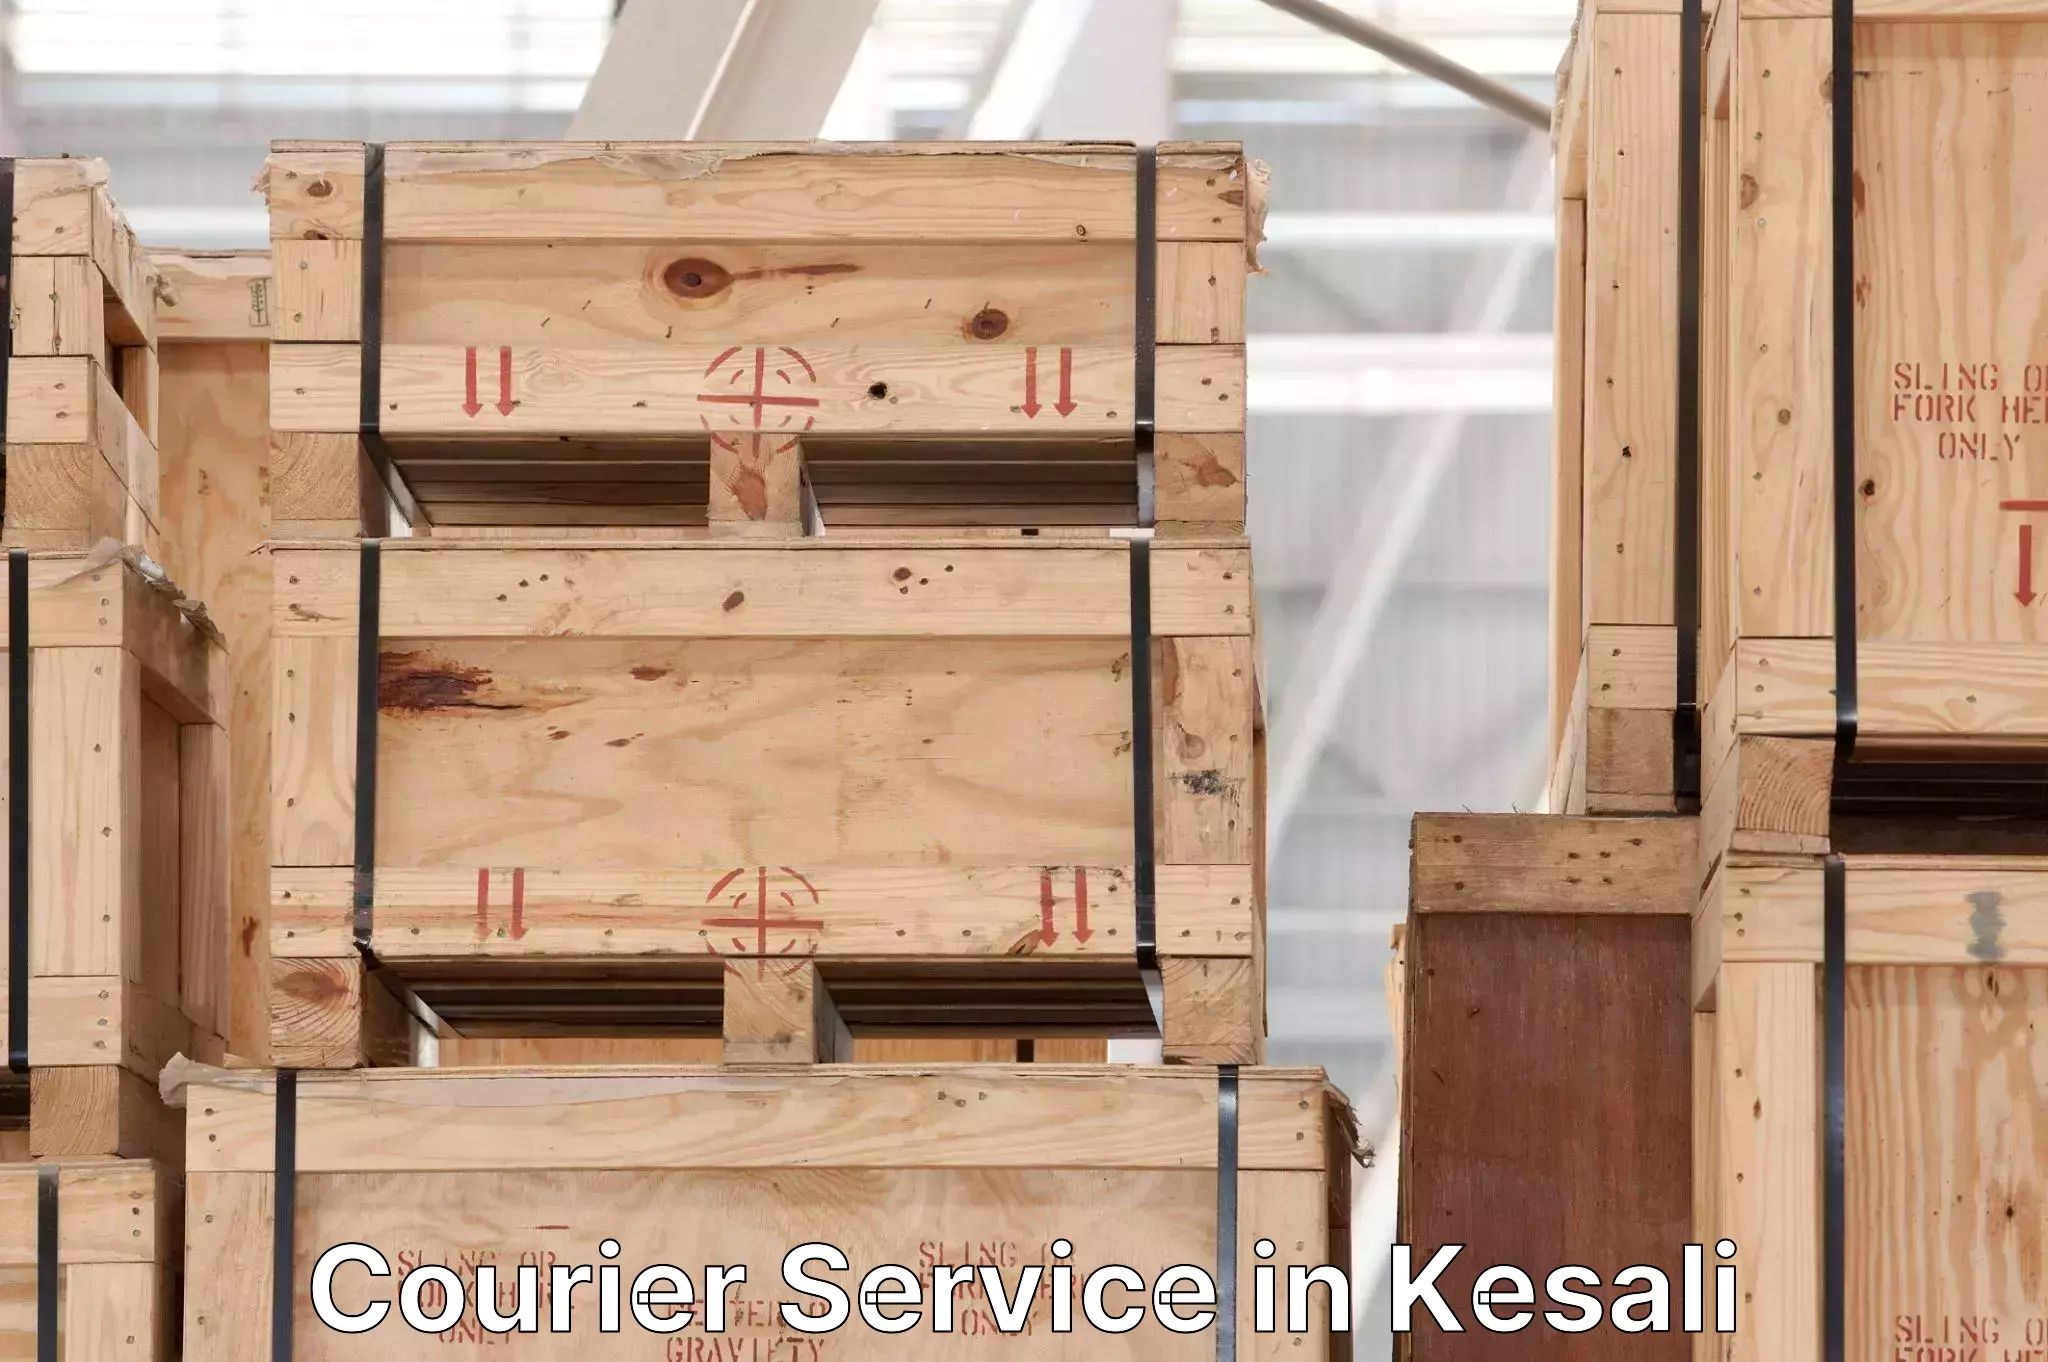 High-quality delivery services in Kesali